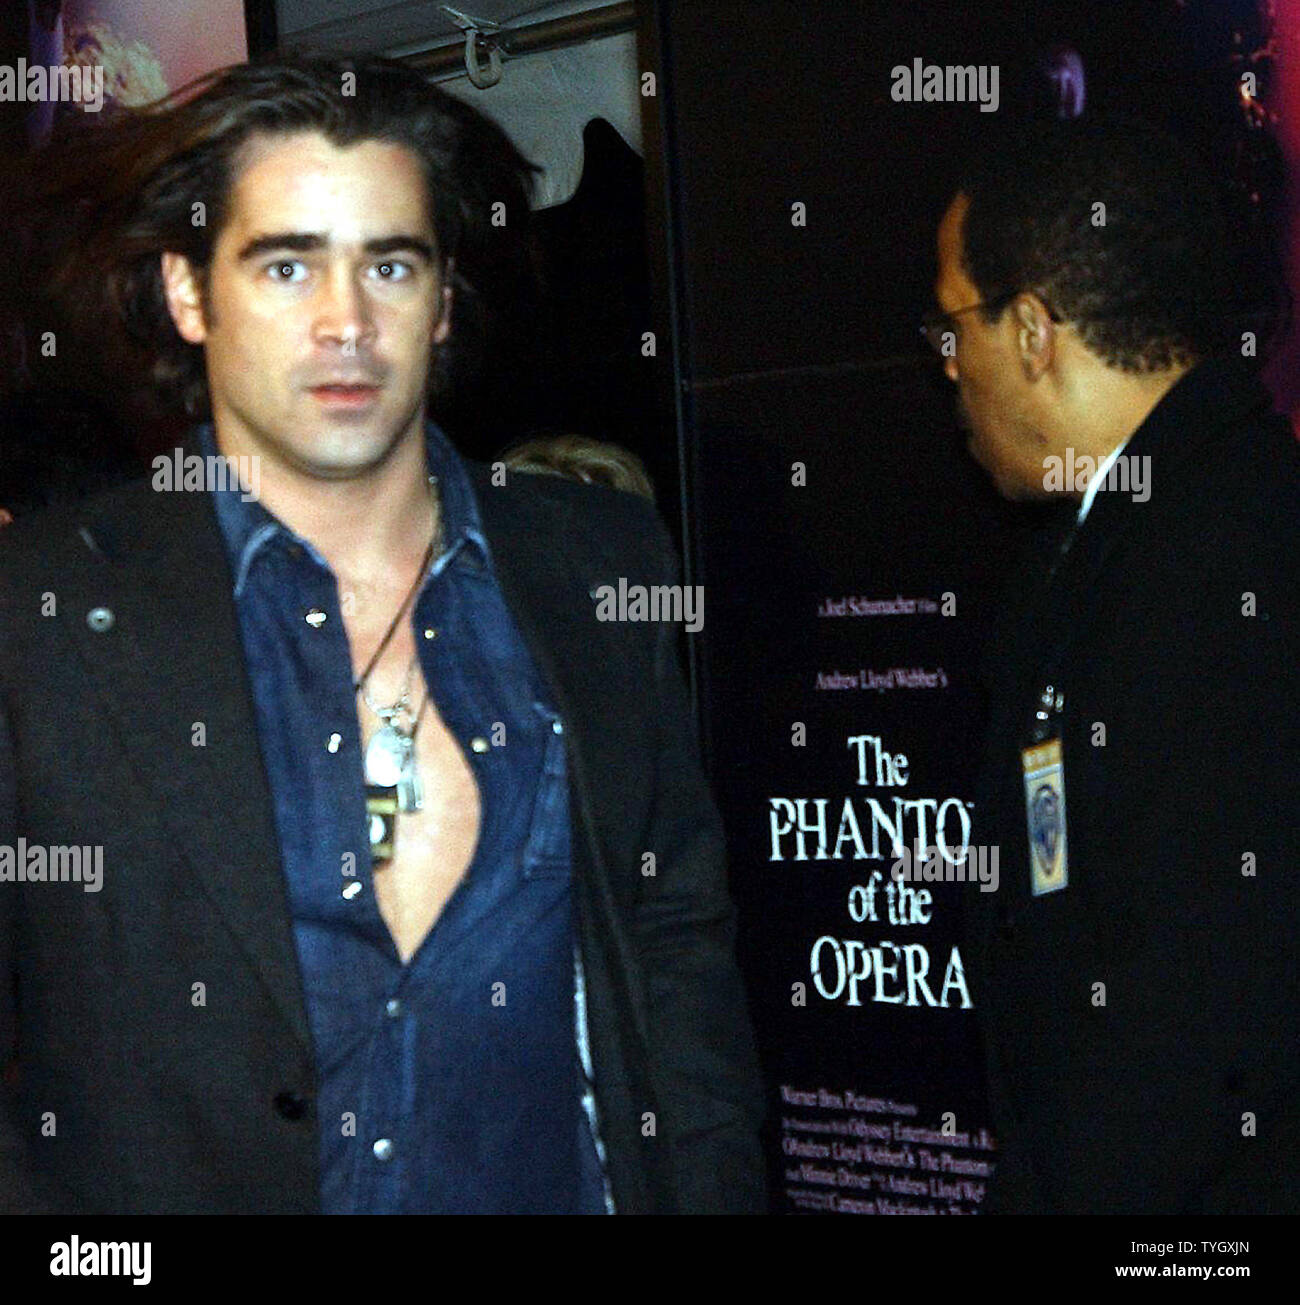 Actor Colin Farrell dashes past the media at the 12/12/04 New York premiere for the film 'The Phantom of the Opera' which is directed by his friend Joel Schumacher.  (UPI Photo/Ezio Petersen) Stock Photo